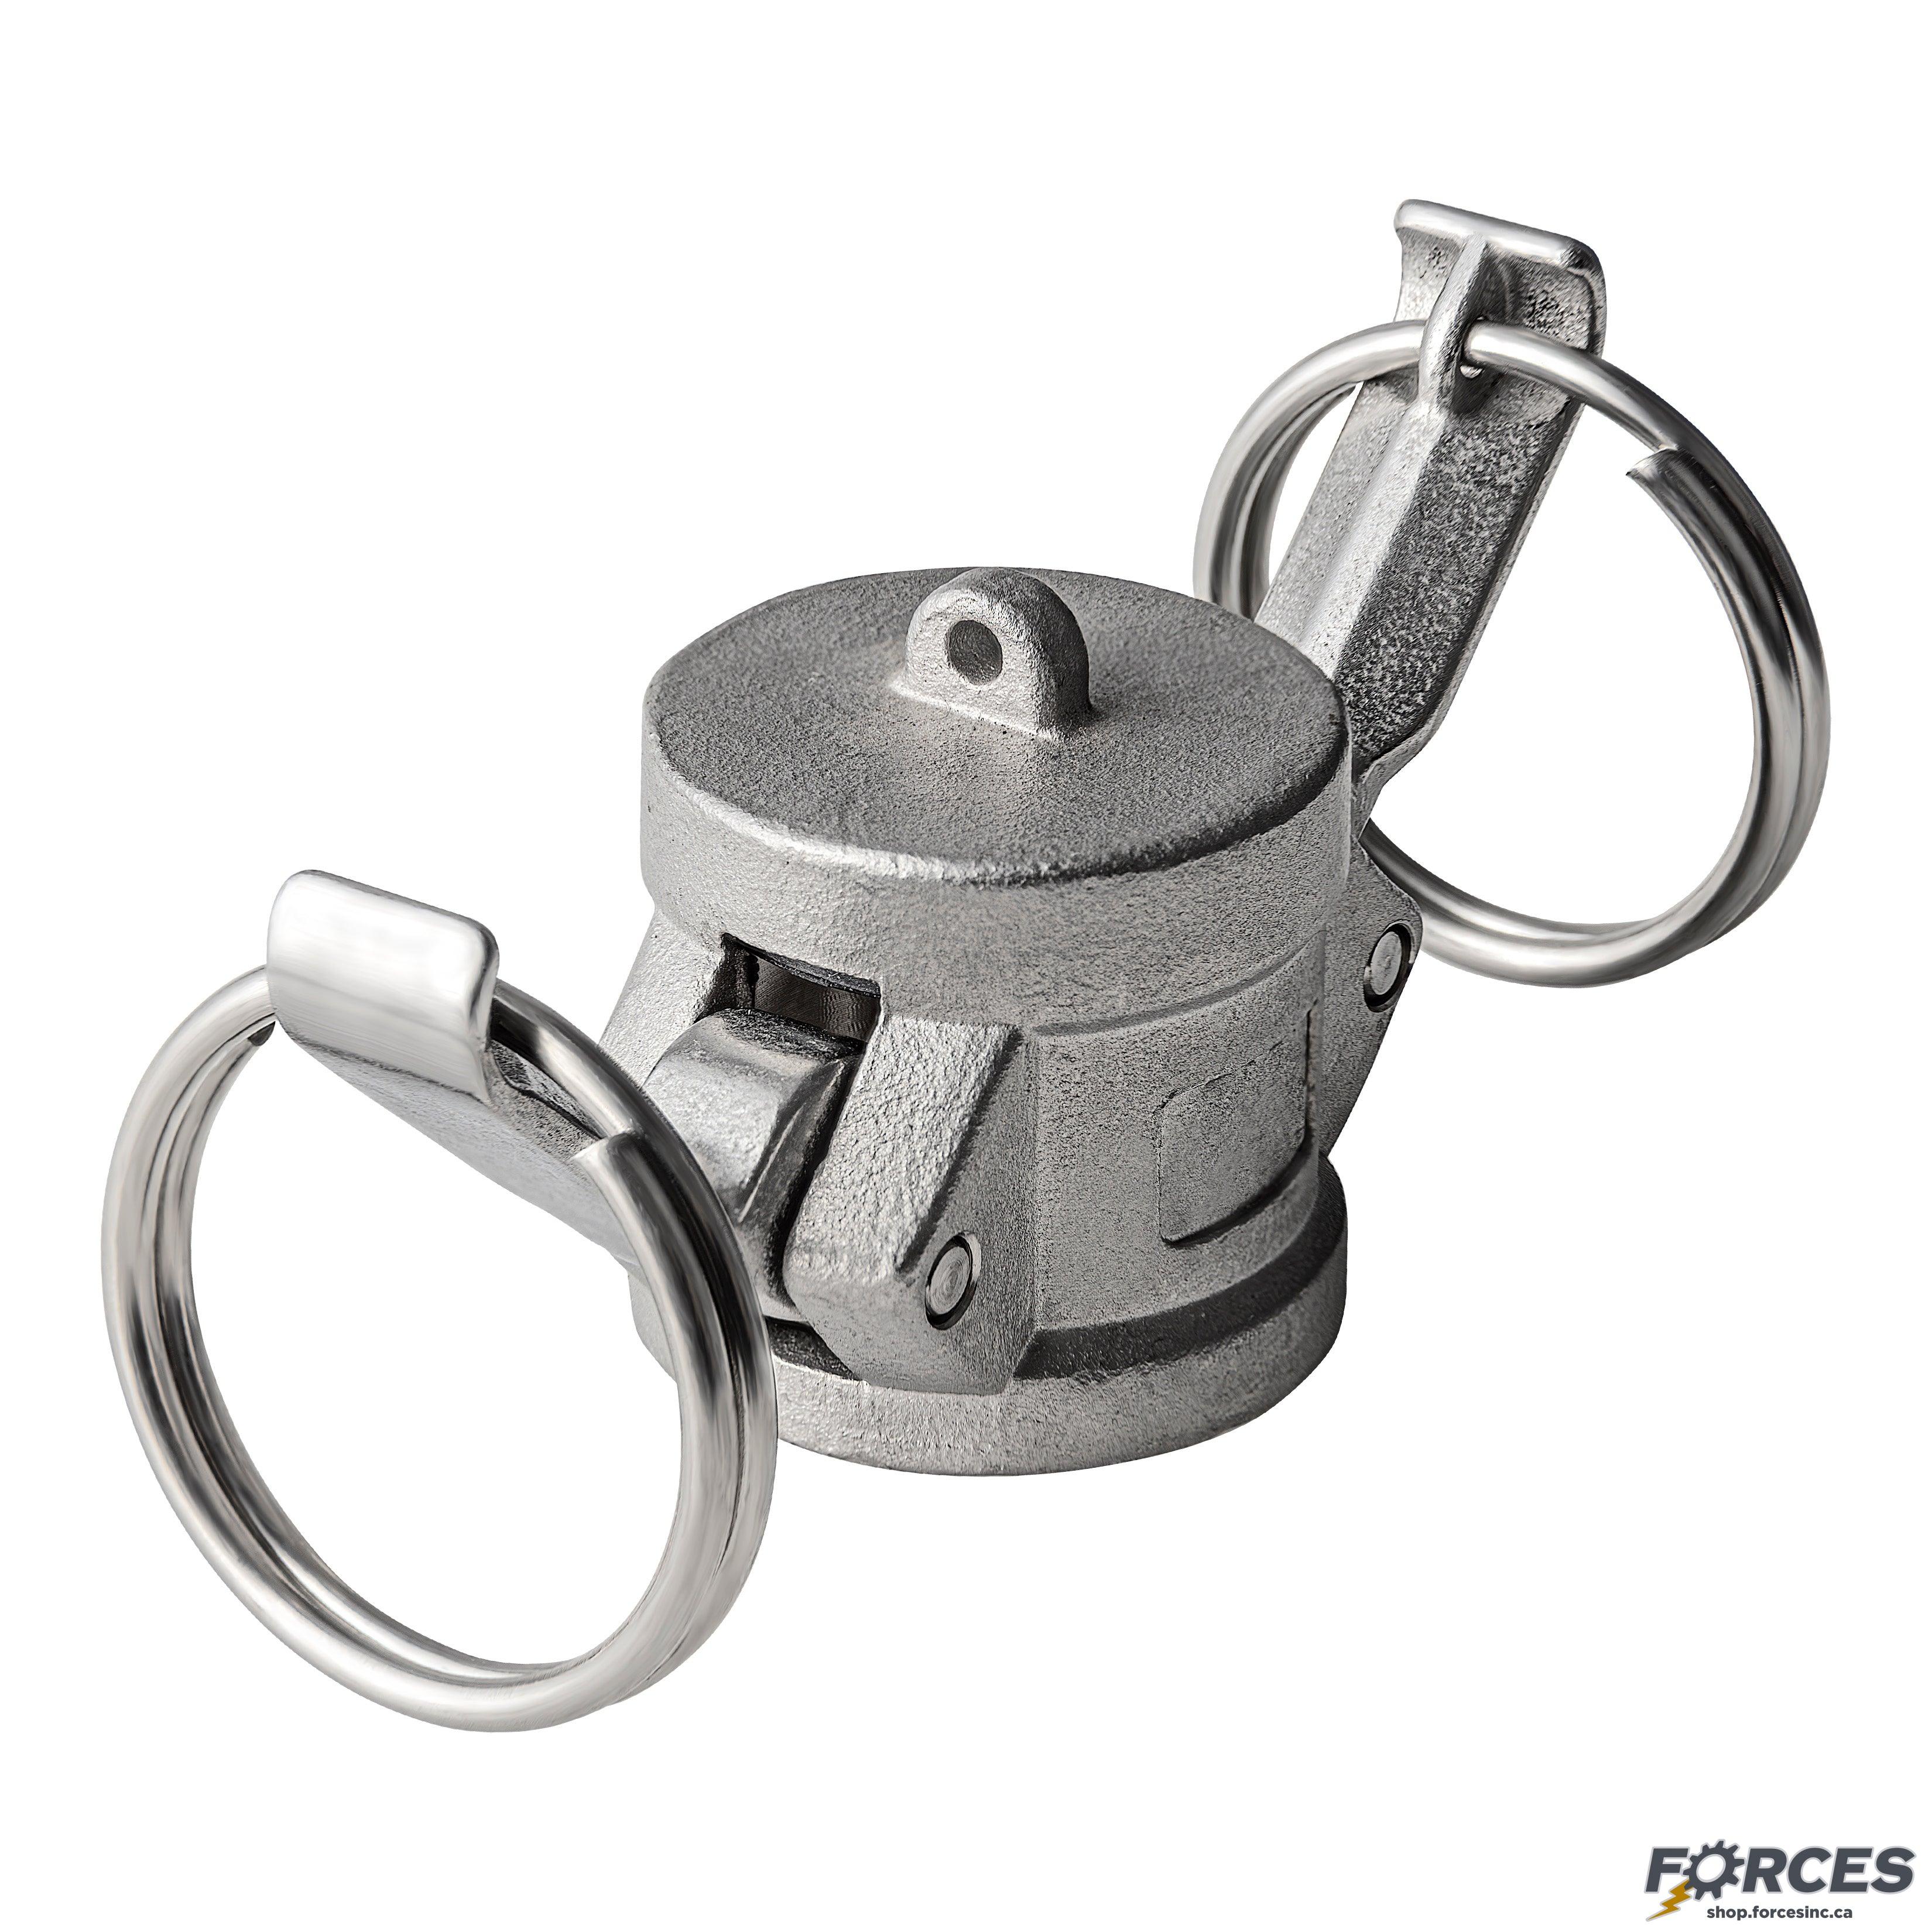 2-1/2" Type DC Camlock Fitting Stainless Steel 316 - Forces Inc